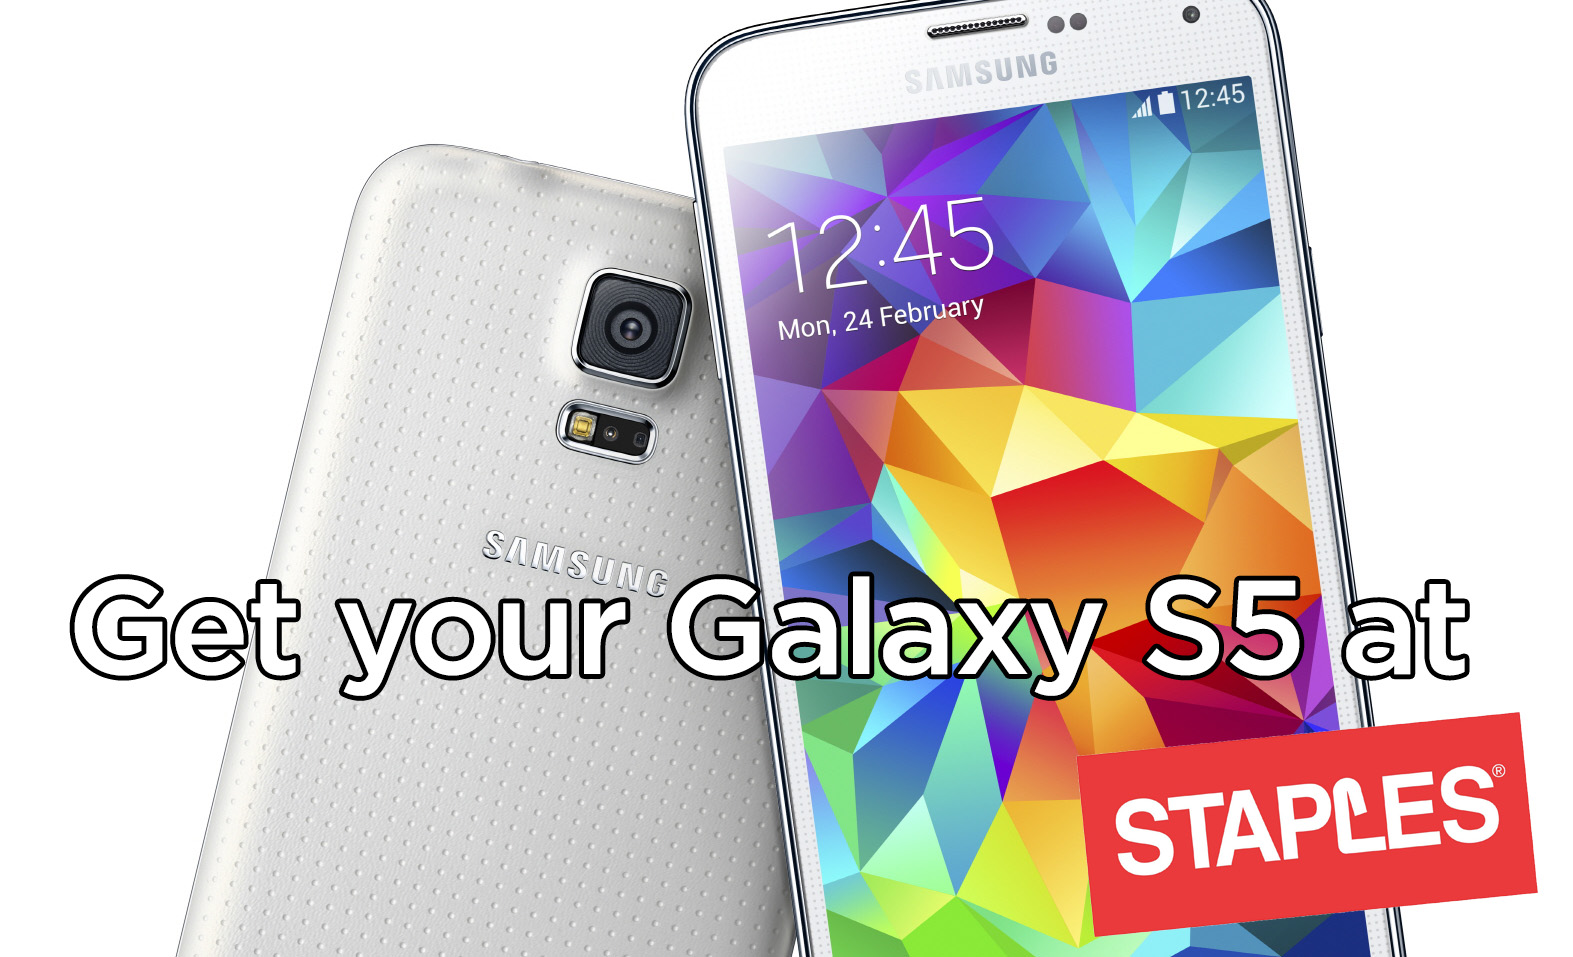 Get the Samsung Galaxy S5 at Staples, and check out their trade-in offer - Mario Armstrong